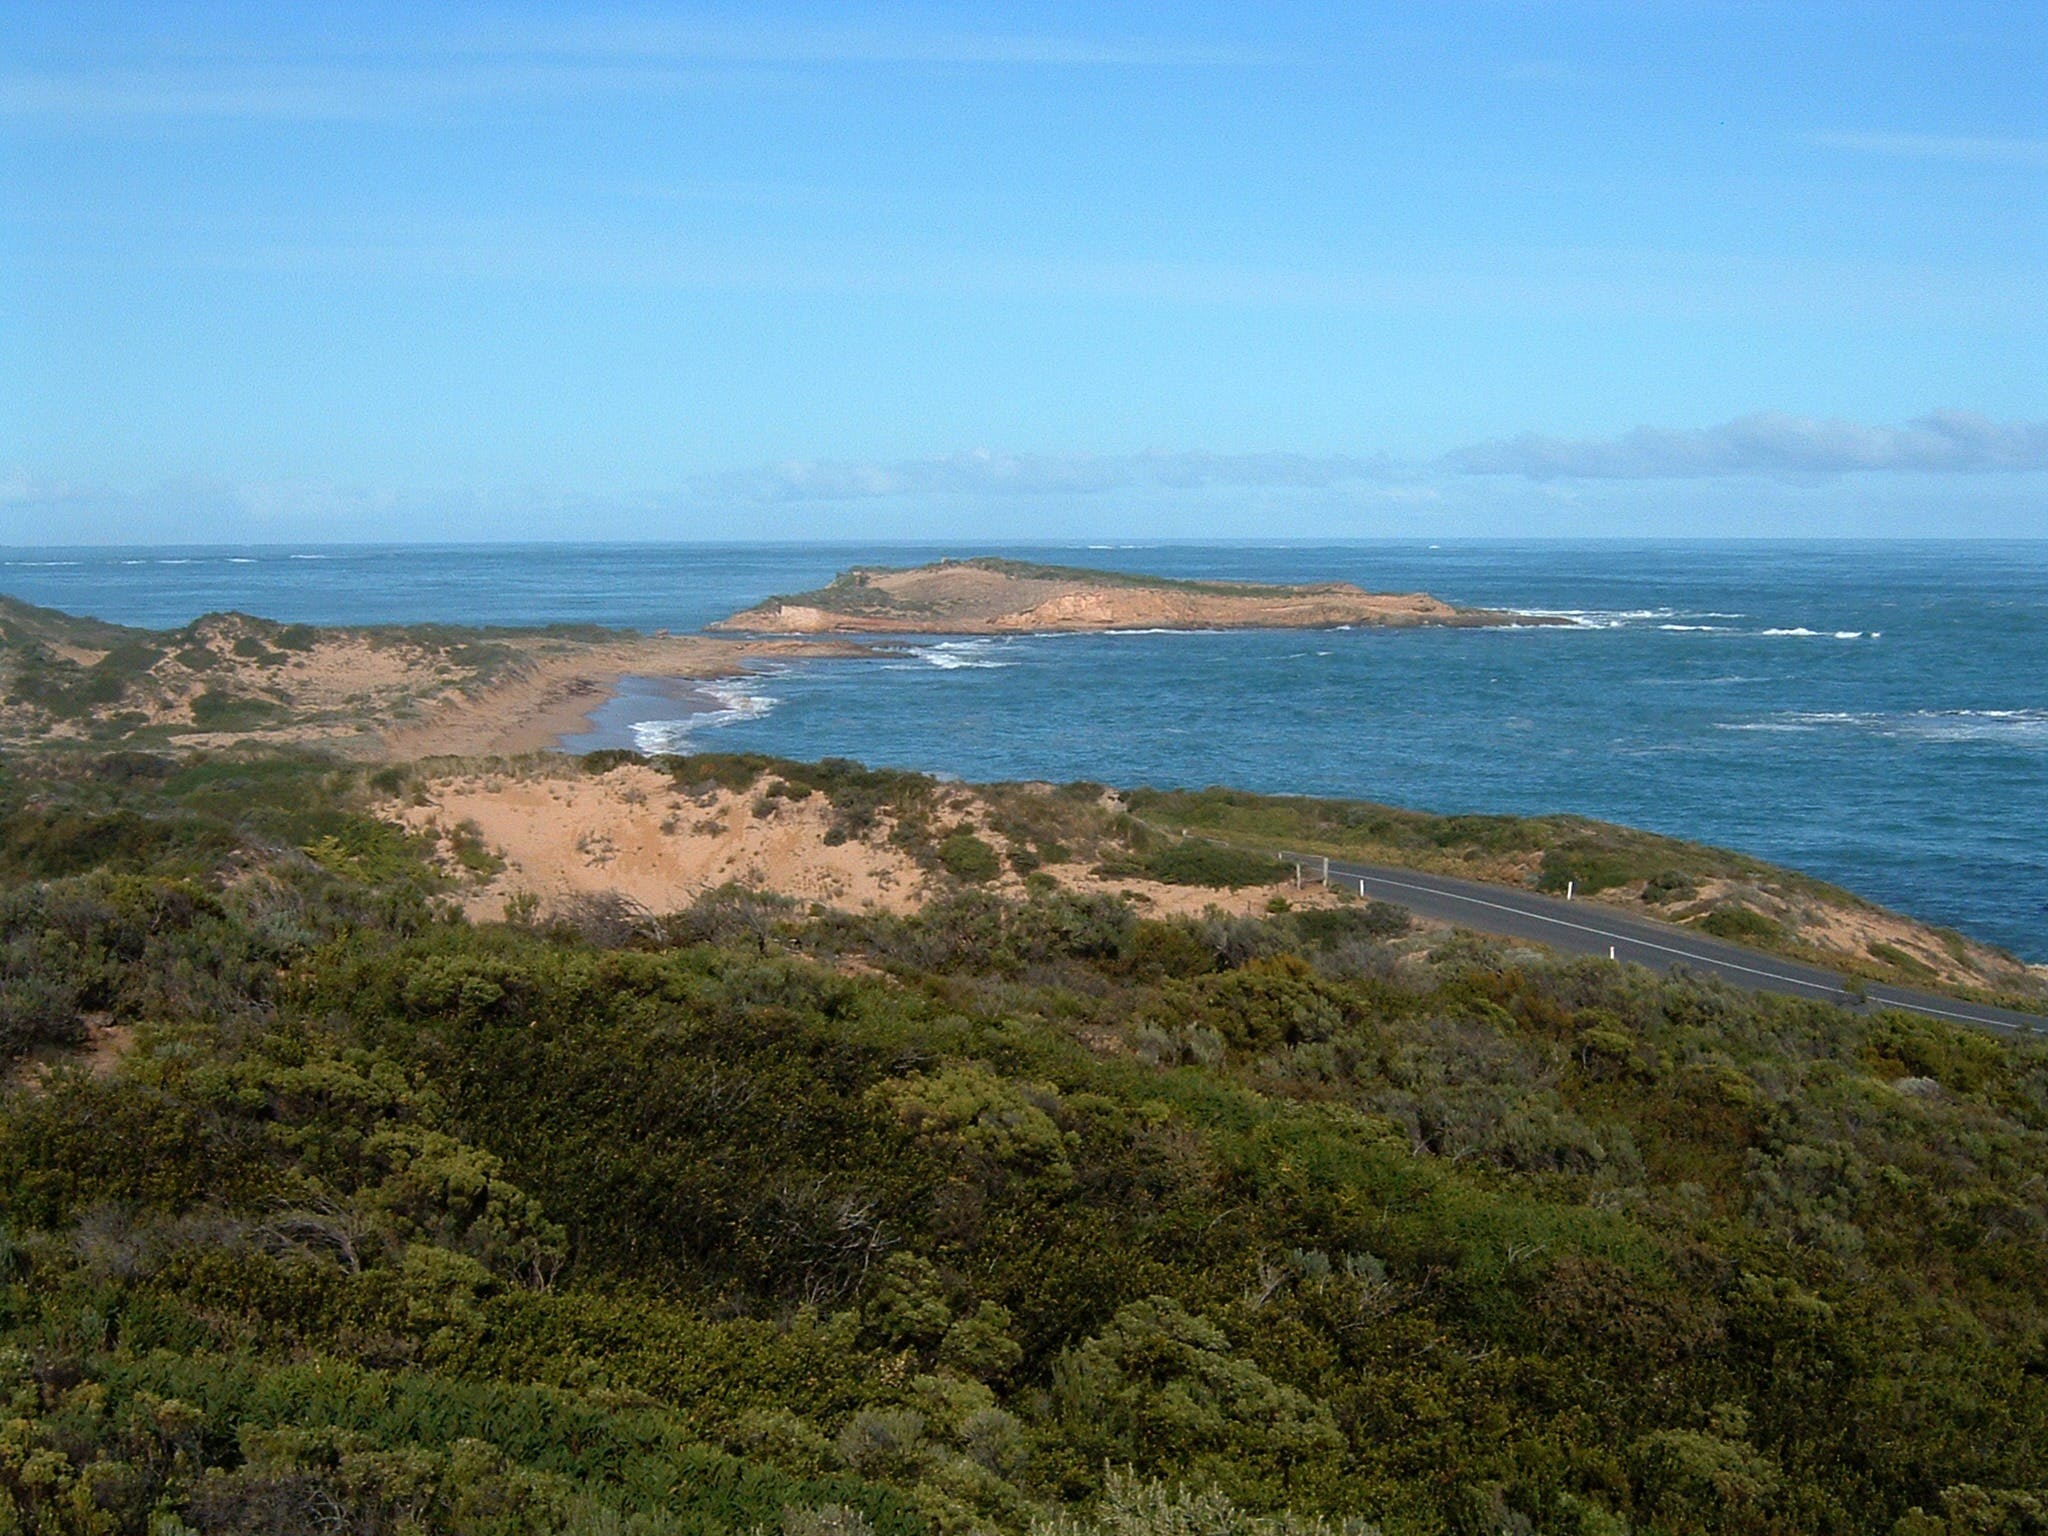 Durants Lookout - Broome Tourism